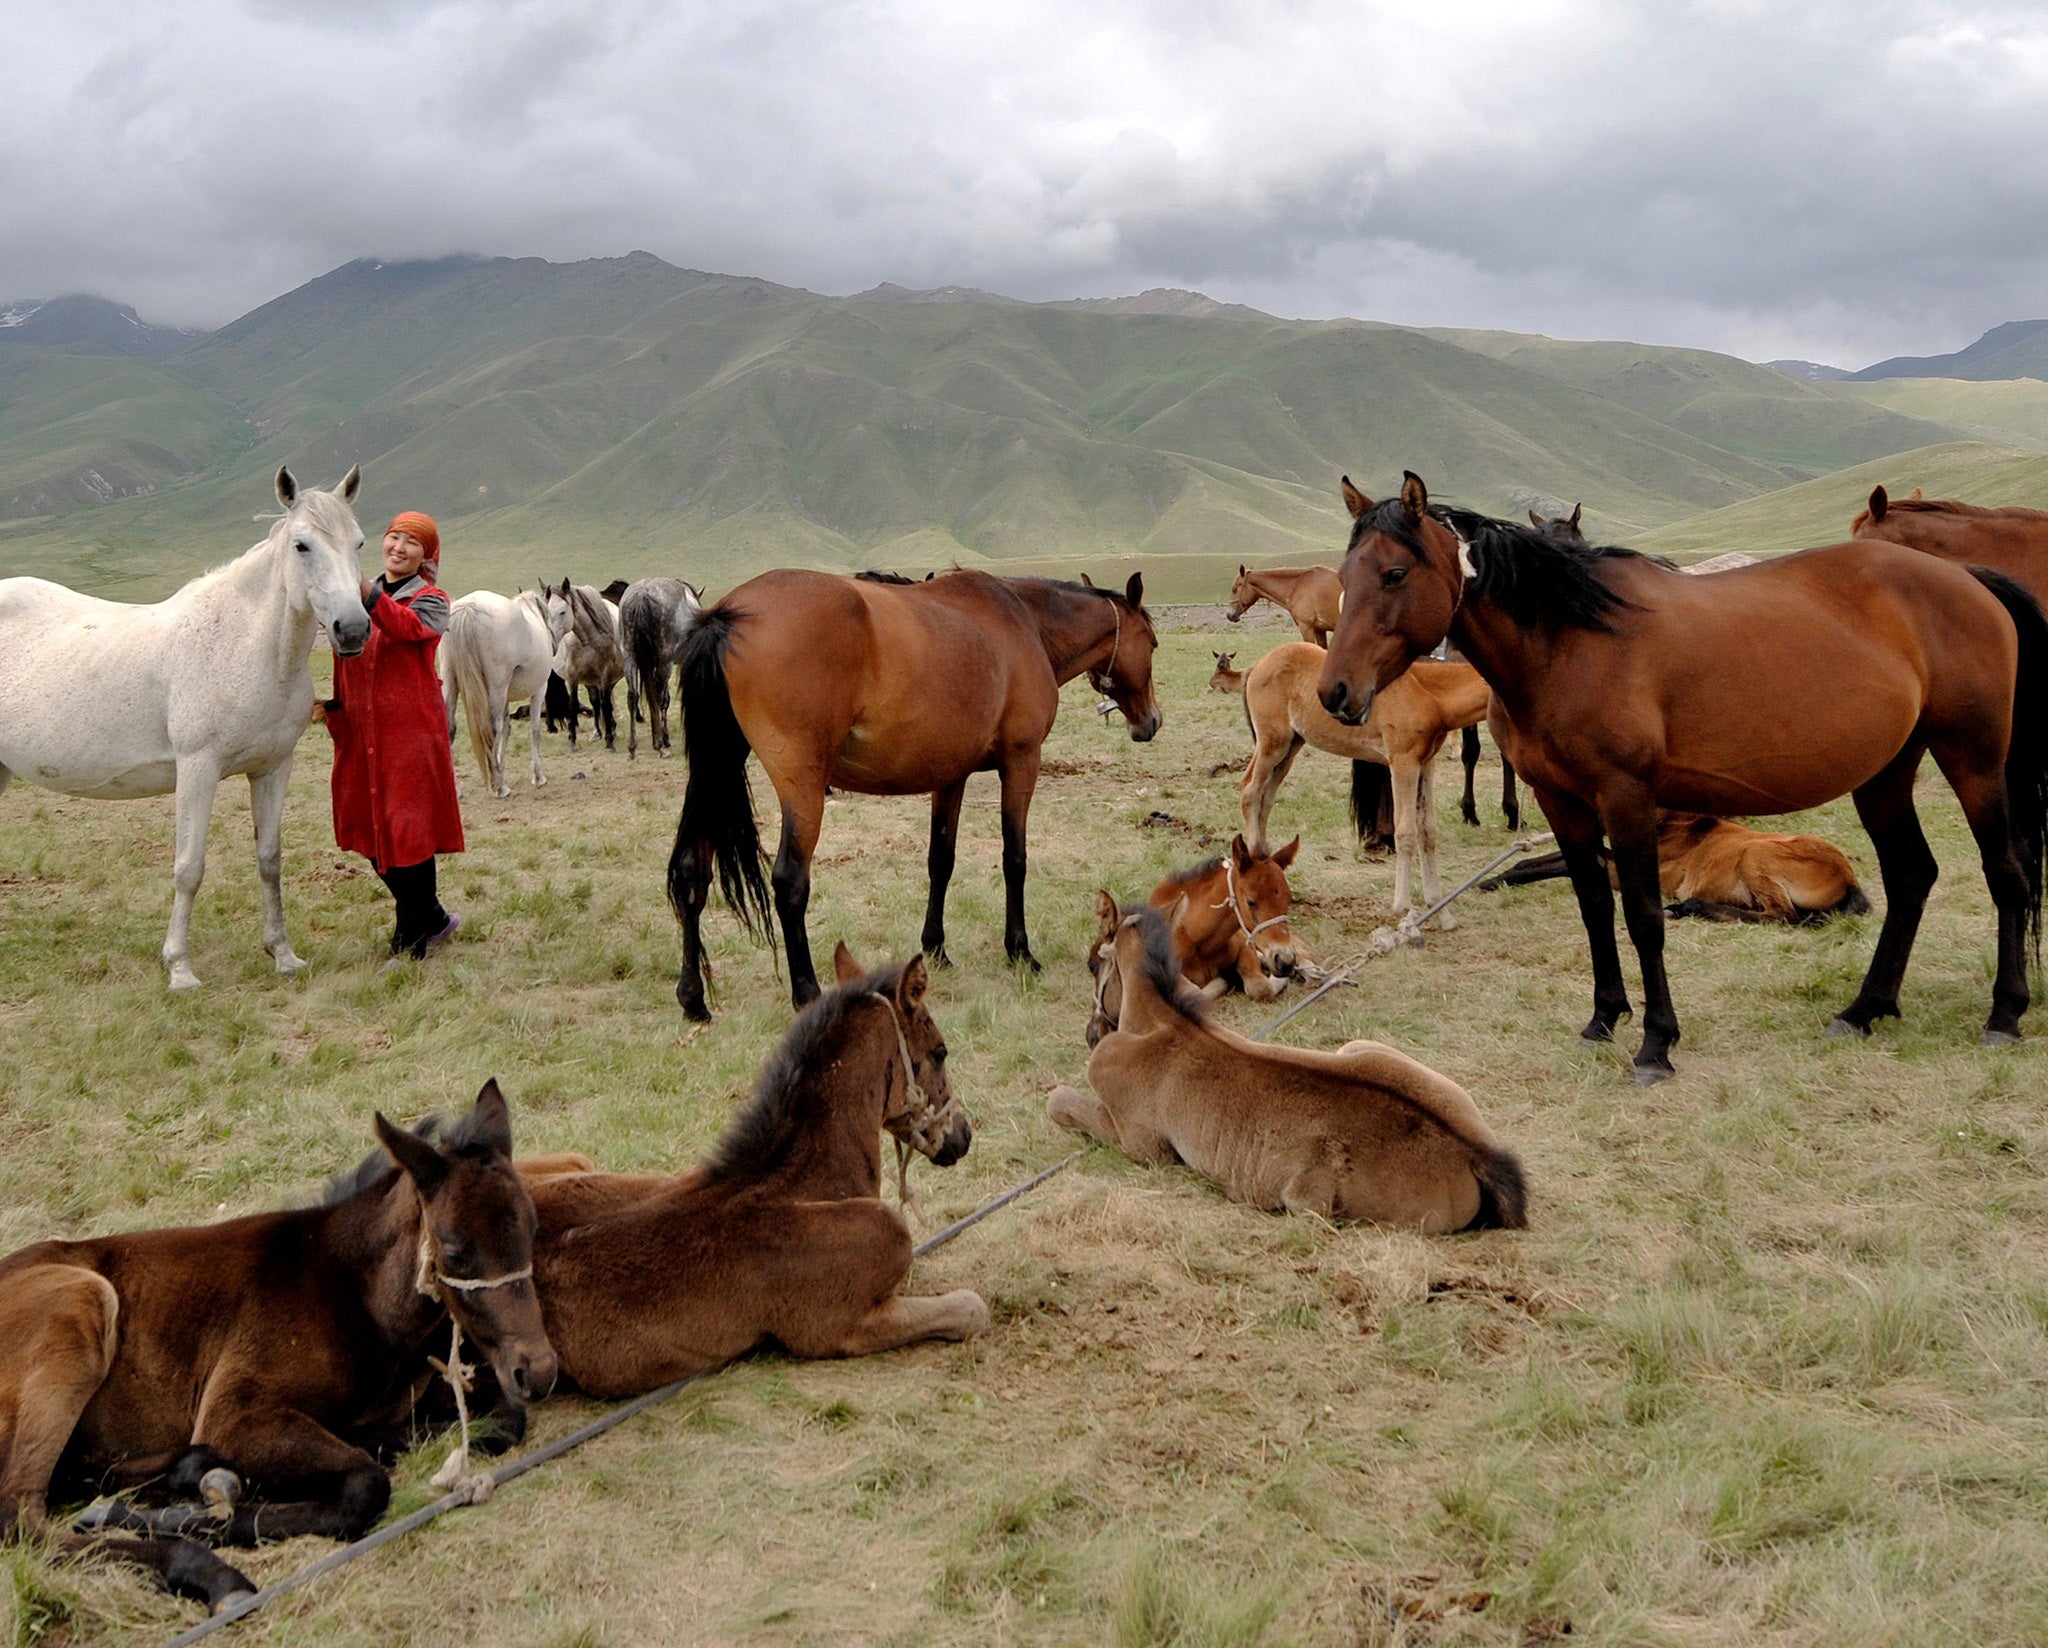 Horses are an important of Kyrgyzstan's traditional nomadic culture